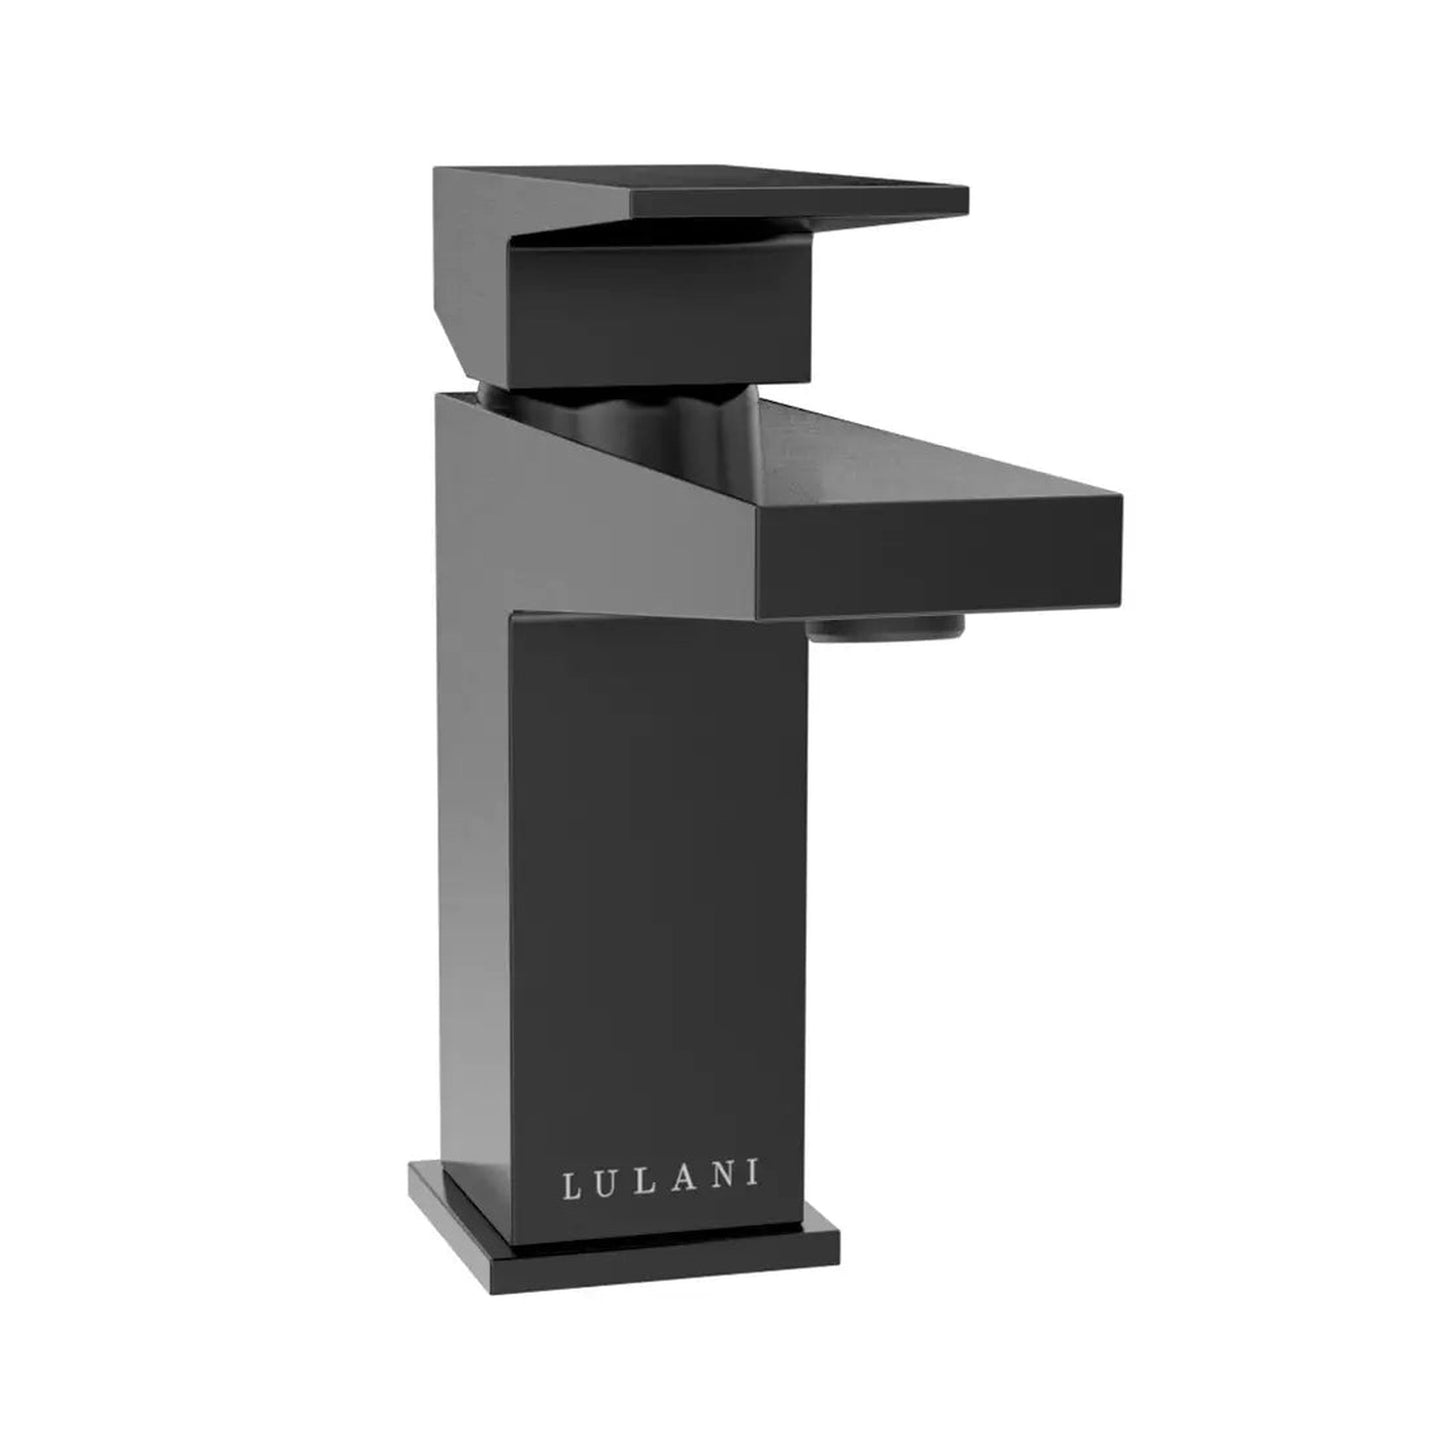 Lulani Boracay Gun Metal 1.2 GPM Single Hole Brass Faucet With Drain Assembly